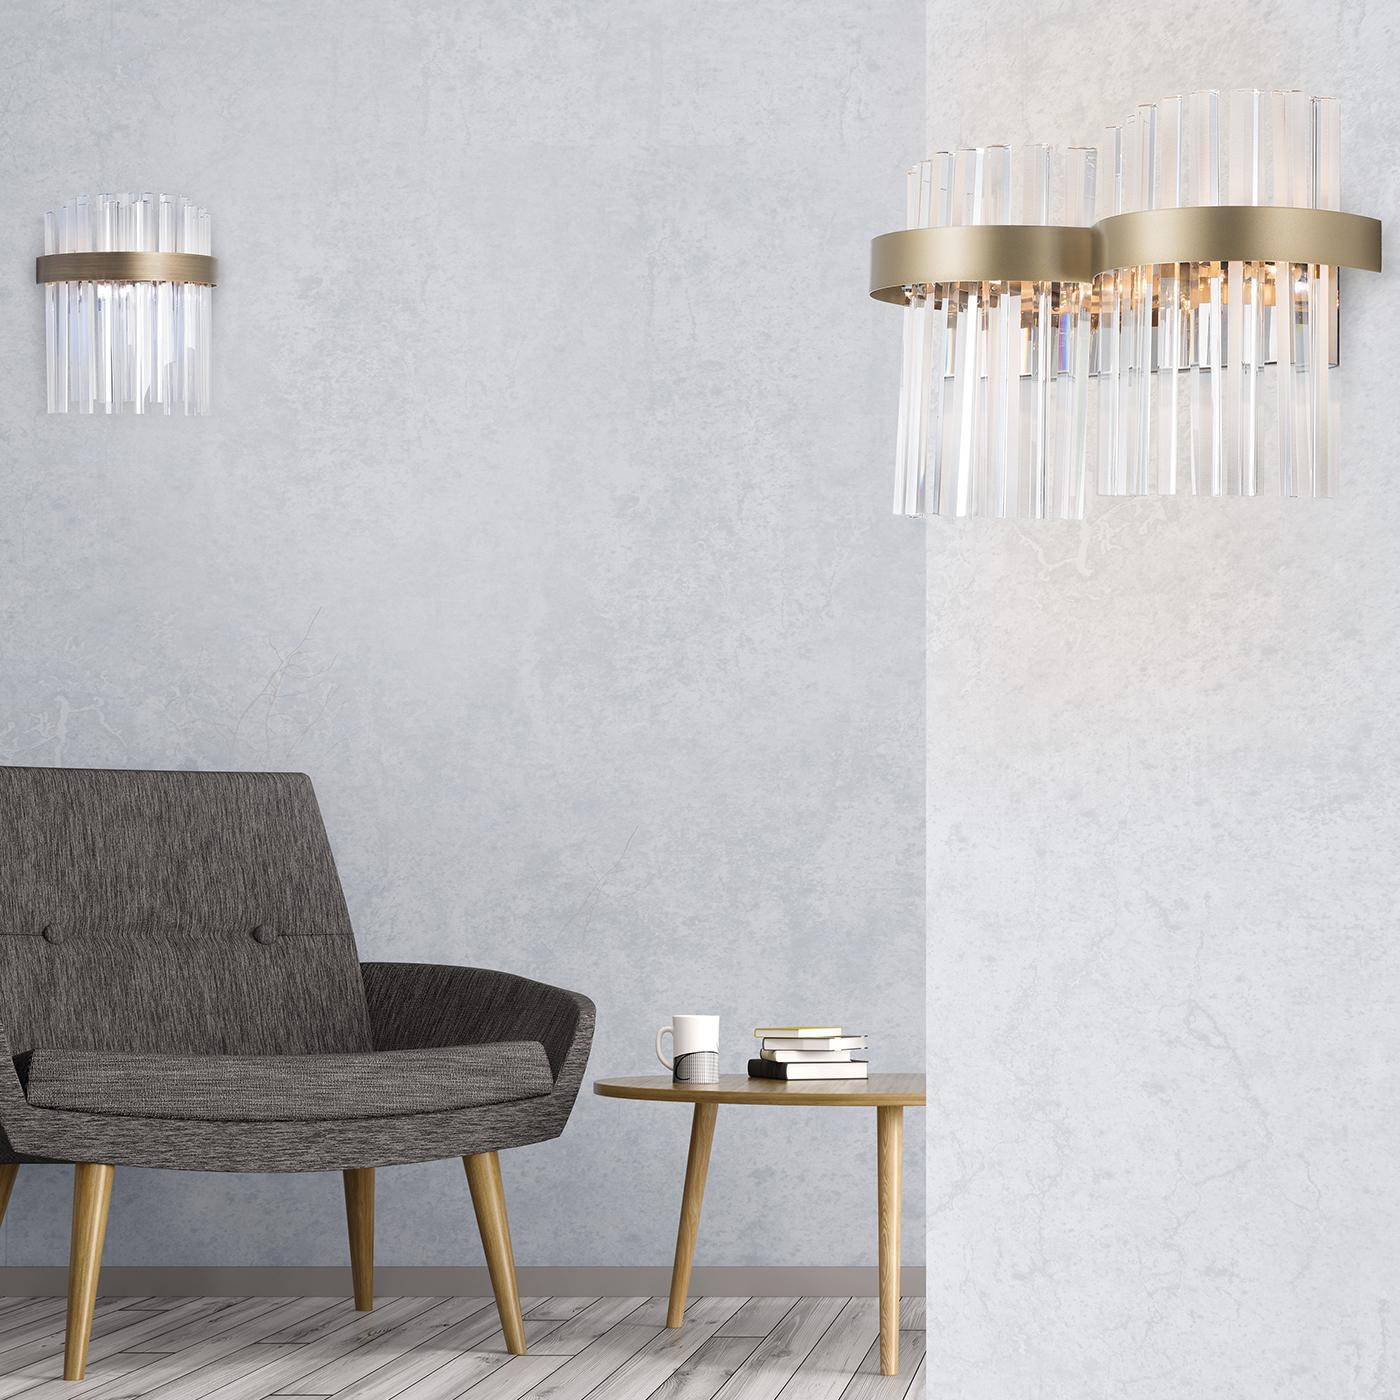 A simple, luxurious wall lamp characterized by its minimalistic and essential design. It is made in T5 lead crystal and it uses 2 G9 energy saver or 2 G9 LED lamps. It is available in the brushed gray, dove-gray or brushed burnished finishes.